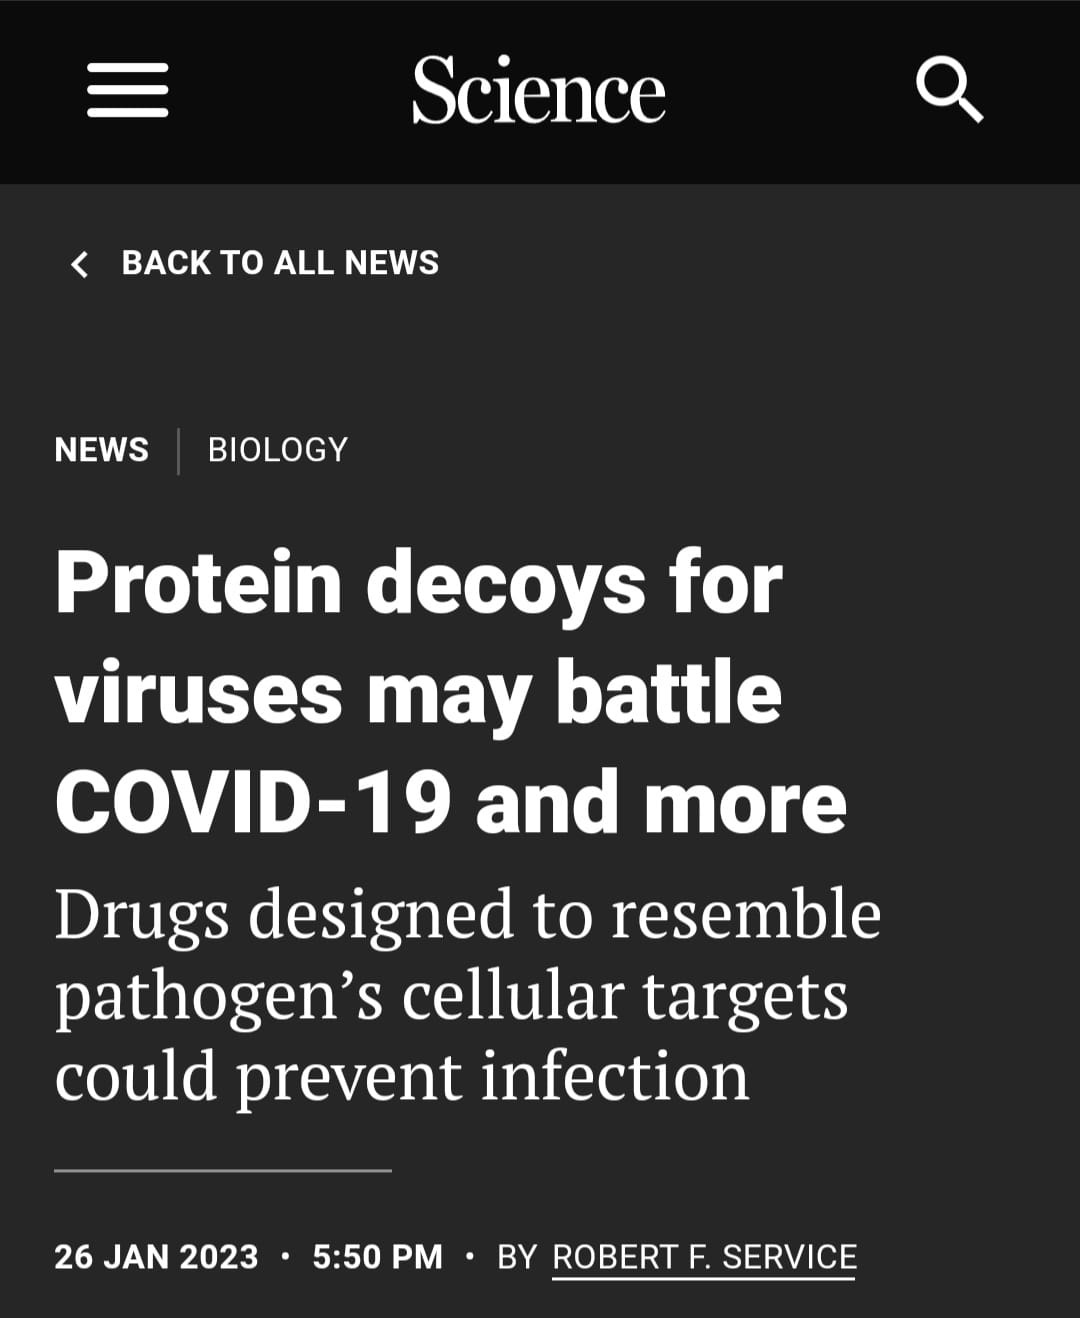 May be an image of text that says 'Science BACK Το ALL NEWS NEWS BIOLOGY Protein decoys for viruses may battle COVID-19 and more Drugs designed to resemble pathogen's cellular targets could prevent infection 26 JAN 2023 5:50 PM BY ROBERT SERVICE'